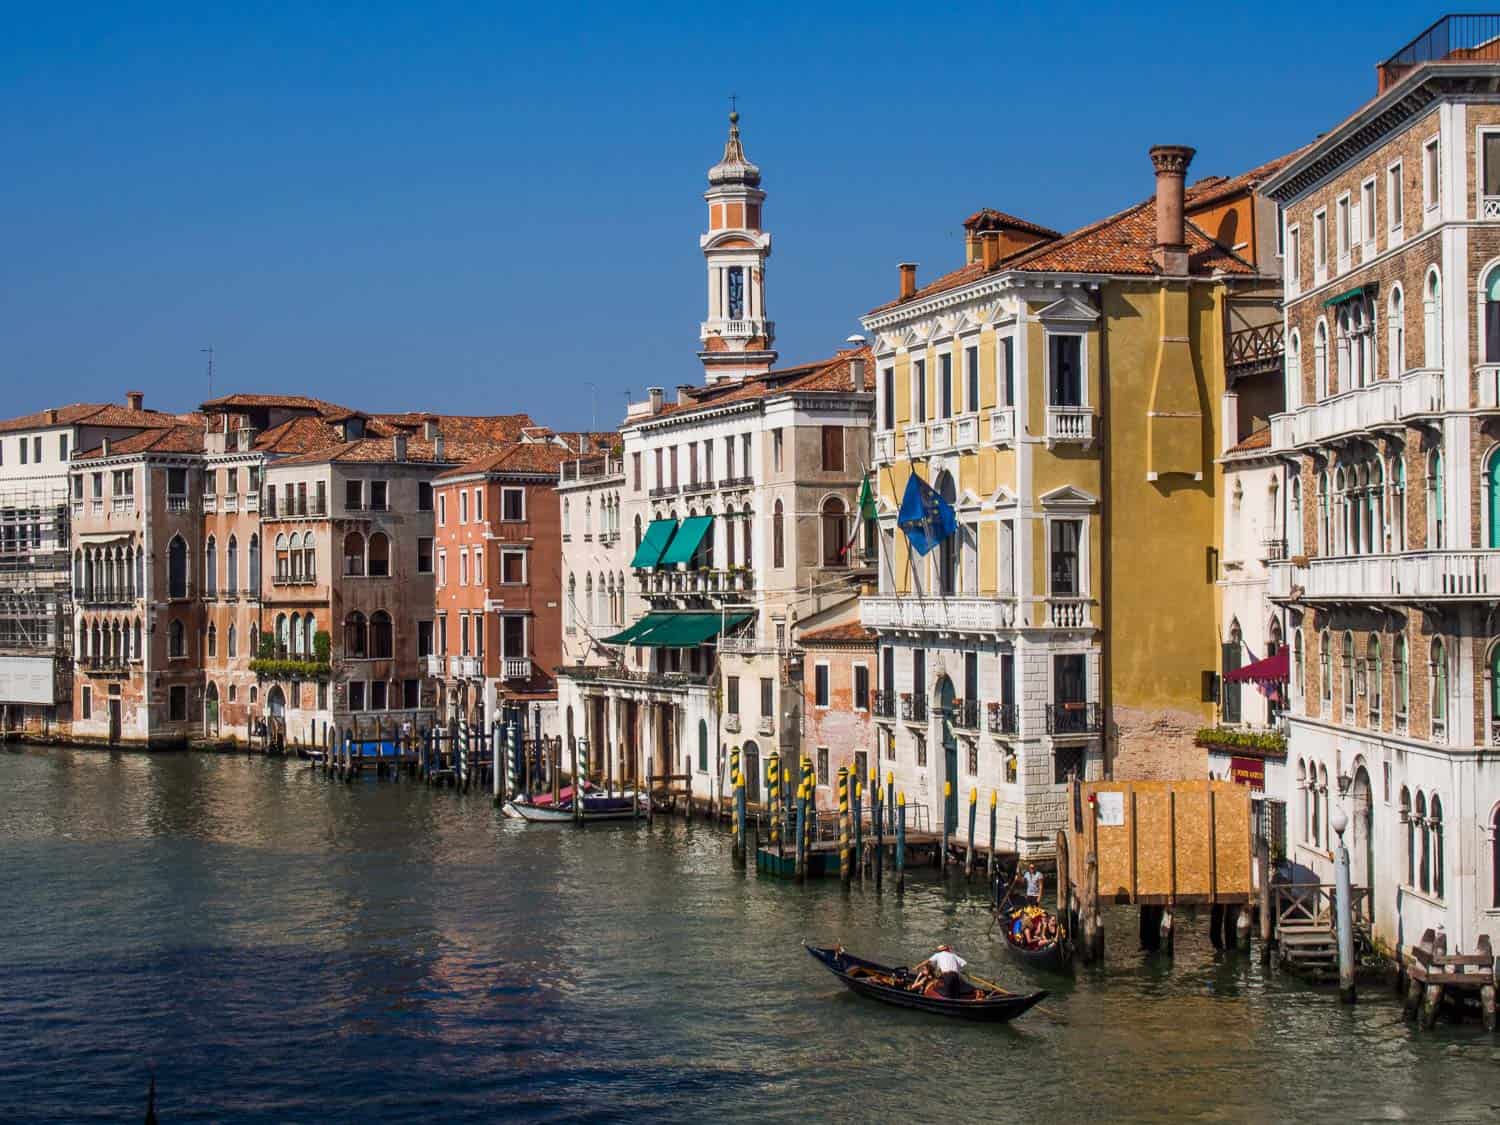 London to Venice train details - the best way to travel between Italy and London